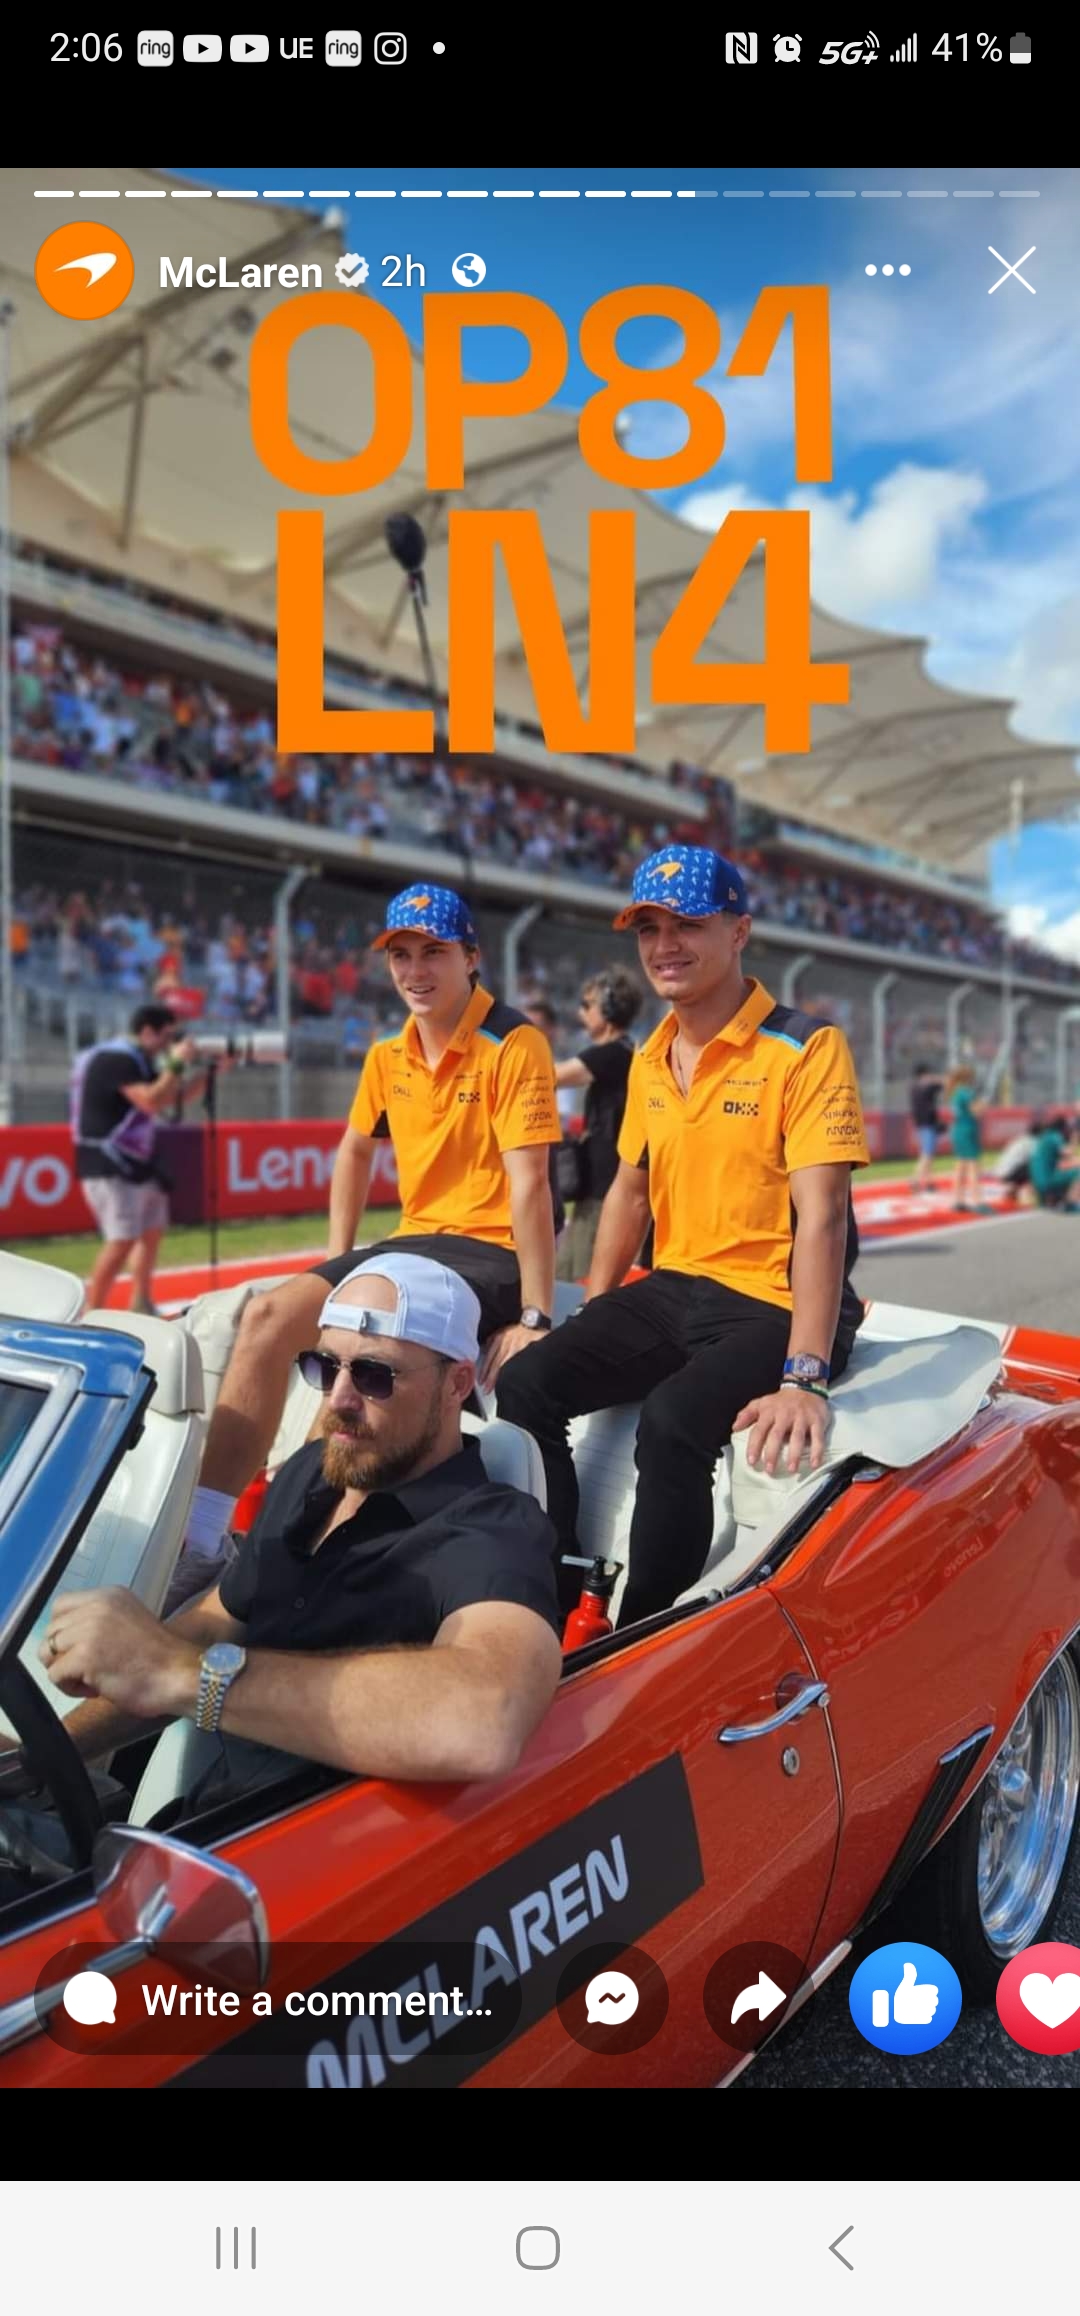 Two individuals in orange McLaren team apparel, engaging in a real estate chat, seated in a classic convertible car at a racing event.